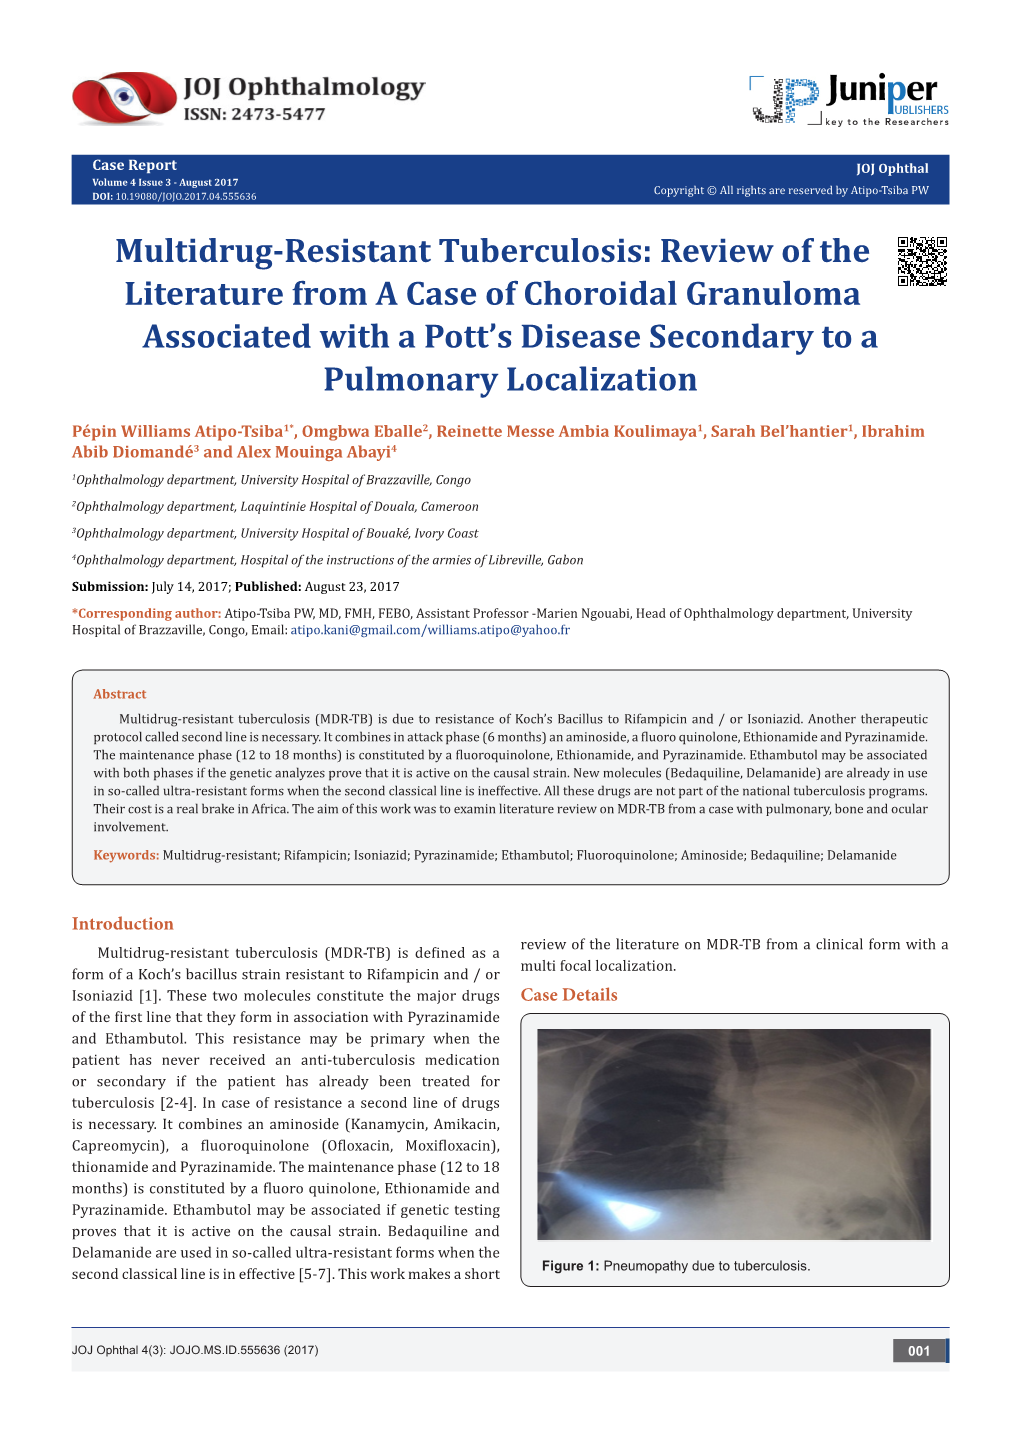 Multidrug-Resistant Tuberculosis: Review of the Literature from a Case of Choroidal Granuloma Associated with a Pott’S Disease Secondary to a Pulmonary Localization